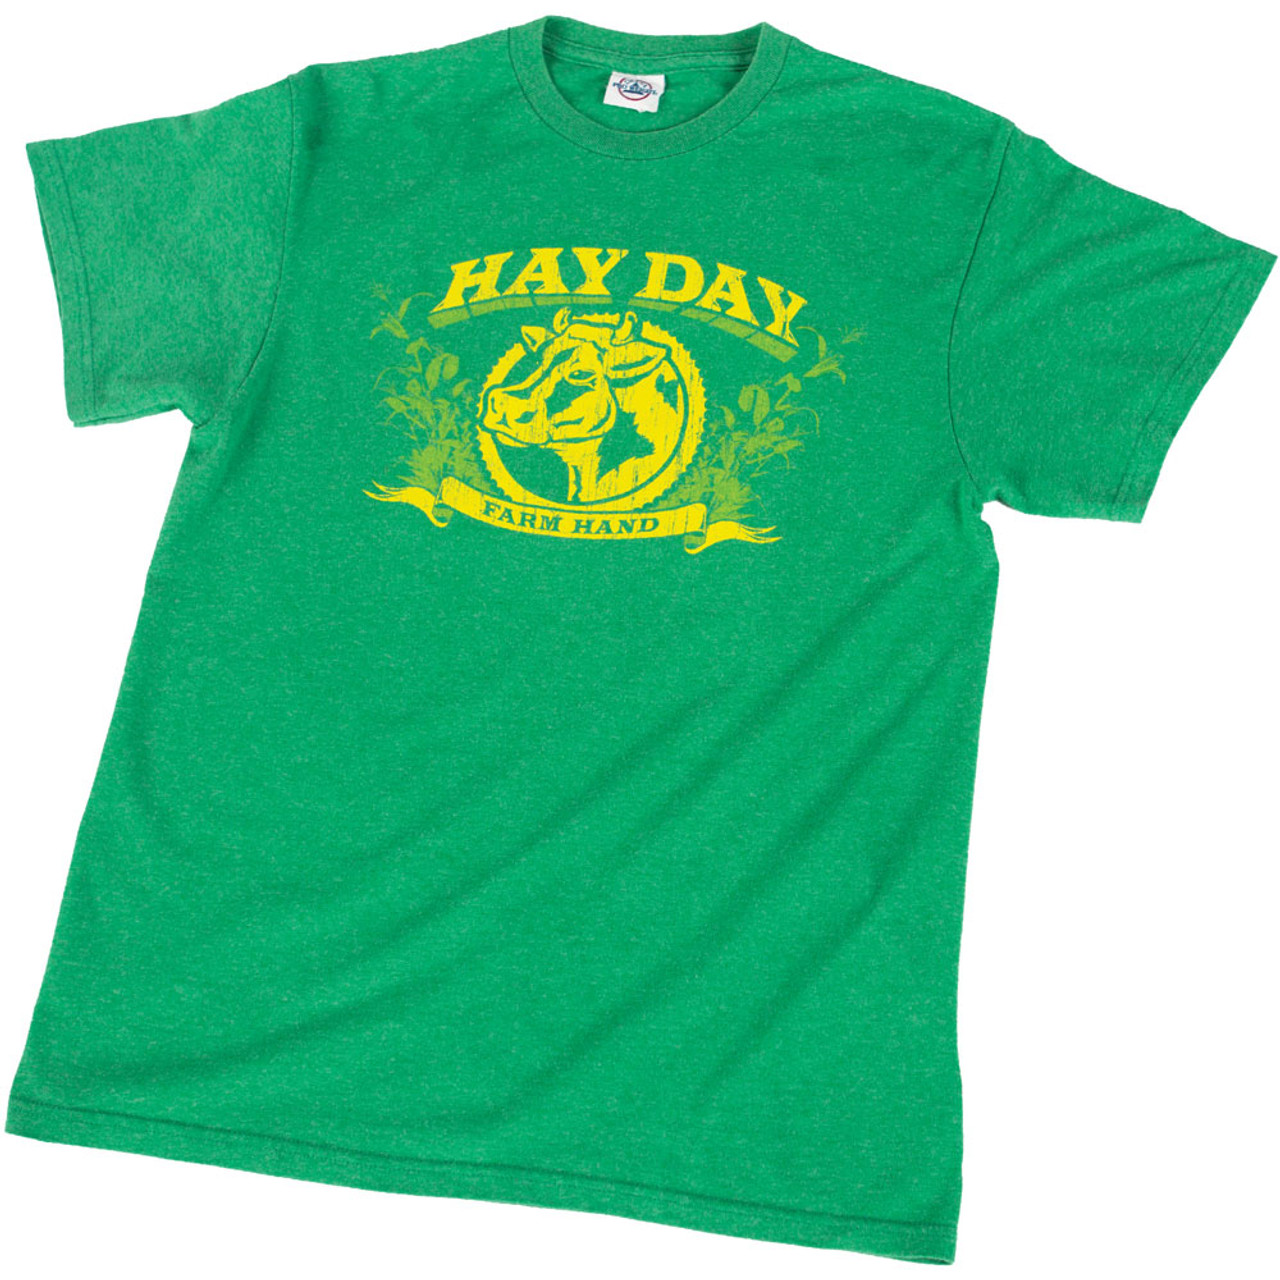 Staff T-shirt - Adult XL - HayDay Weekend VBS by Group